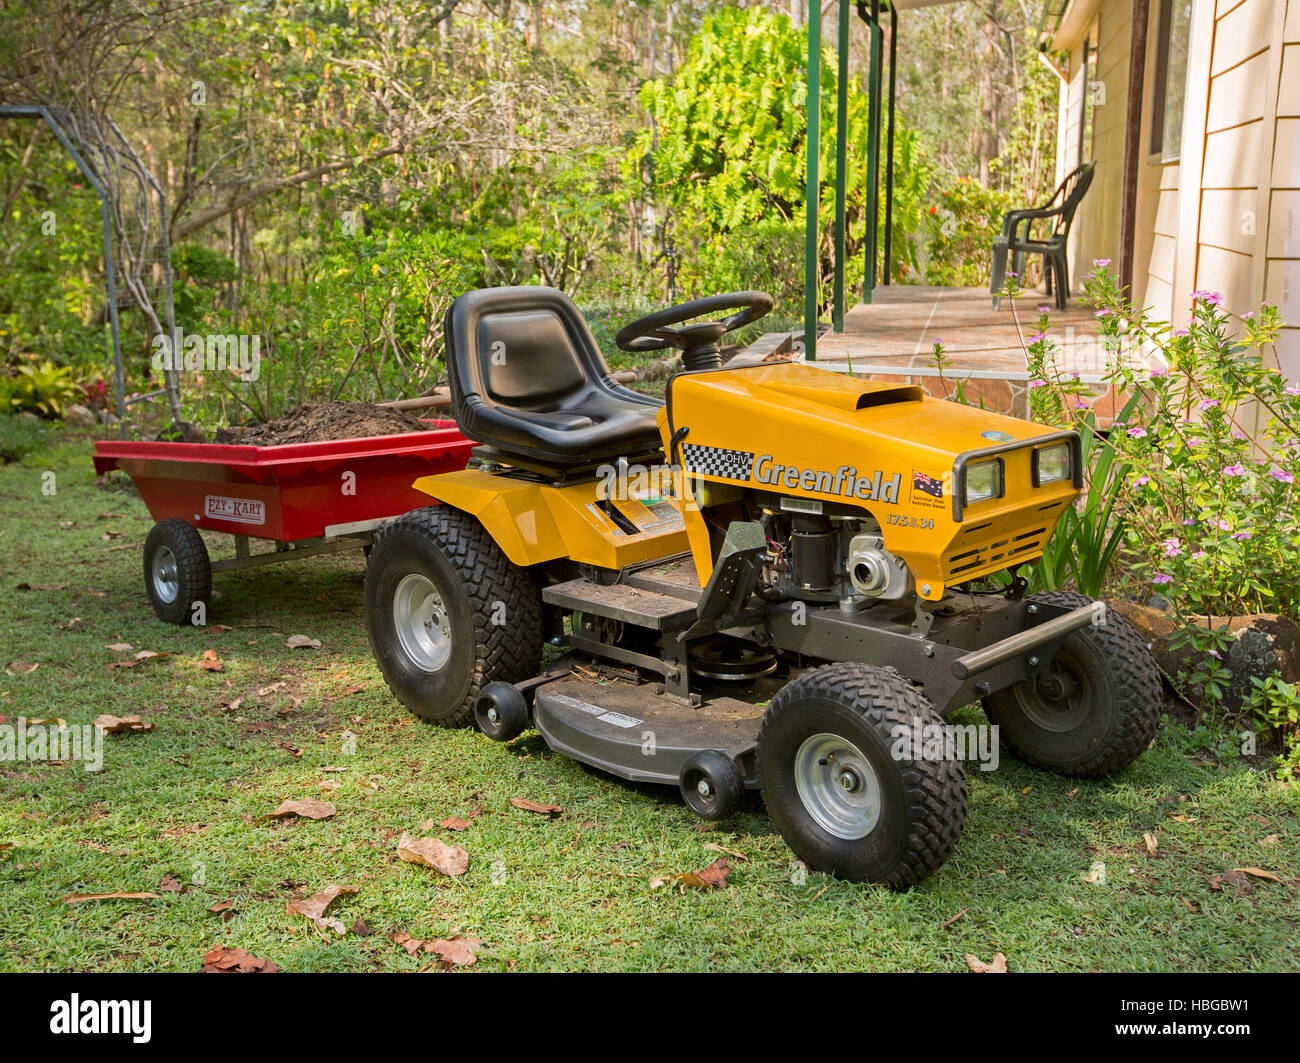 Yellow ride-on mower towing small red trailer full of soil on lawn beside house with lush garden of shrubs and trees Stock Photo